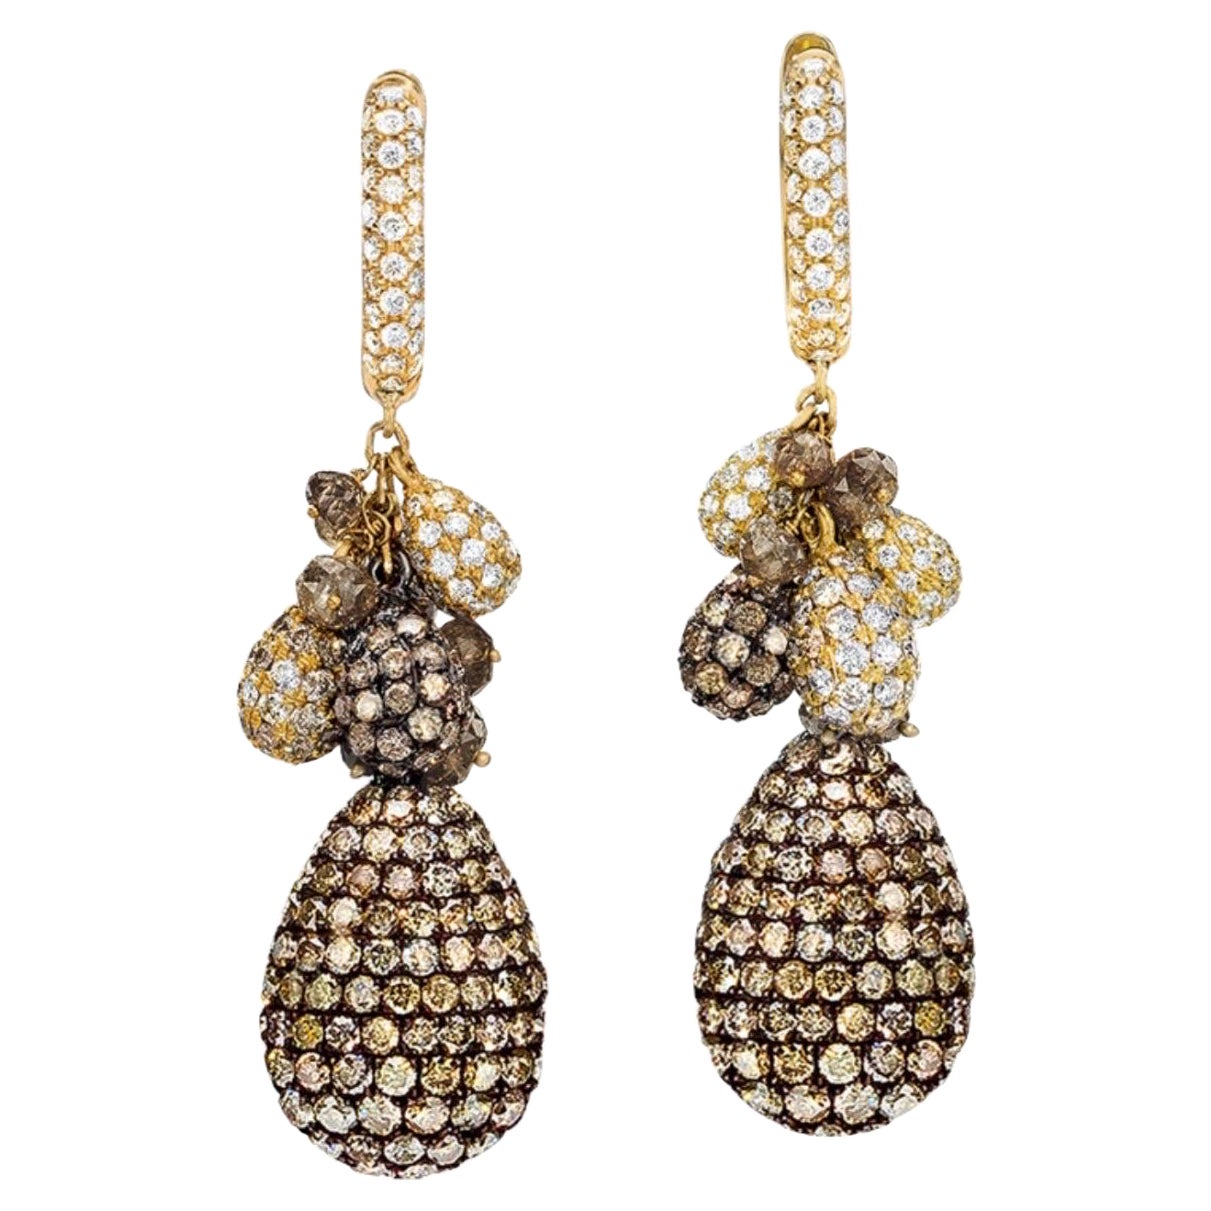 Mariani 18KT YG Drop Earrings with Brown 4.44Cts and White Diamonds 1.89 Cts.